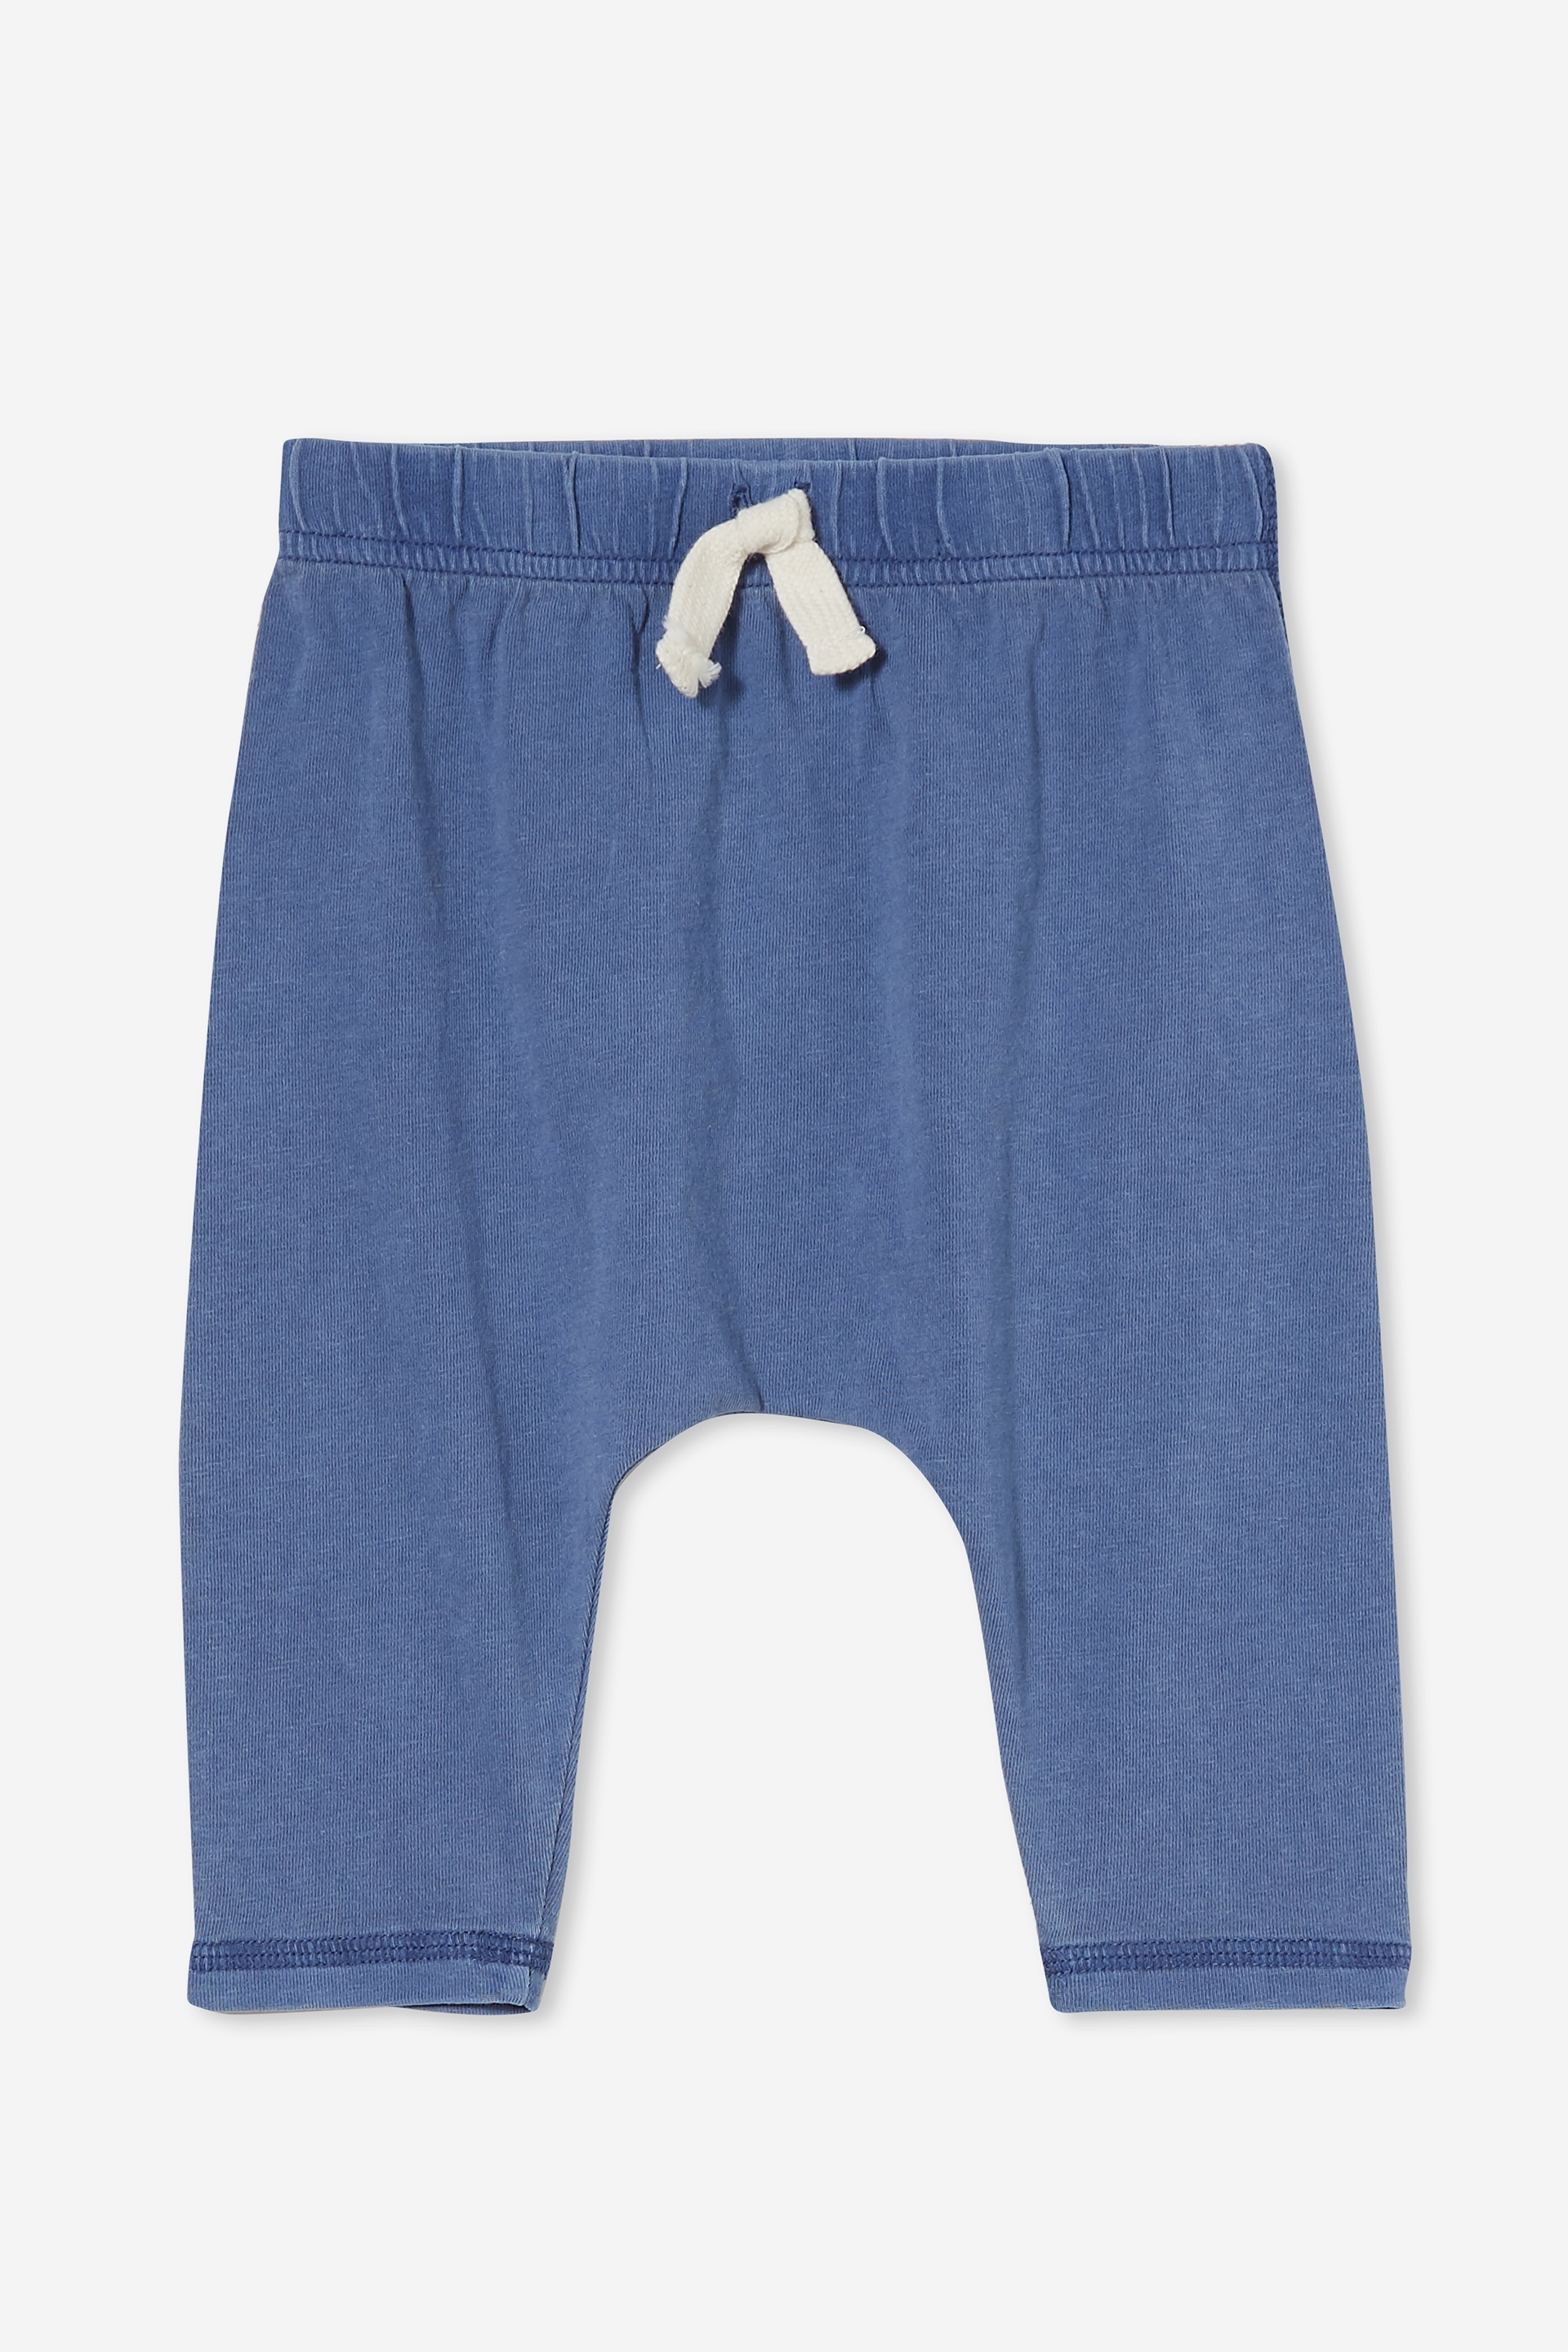 Cotton On Kids - Anders Legging - Petty blue wash